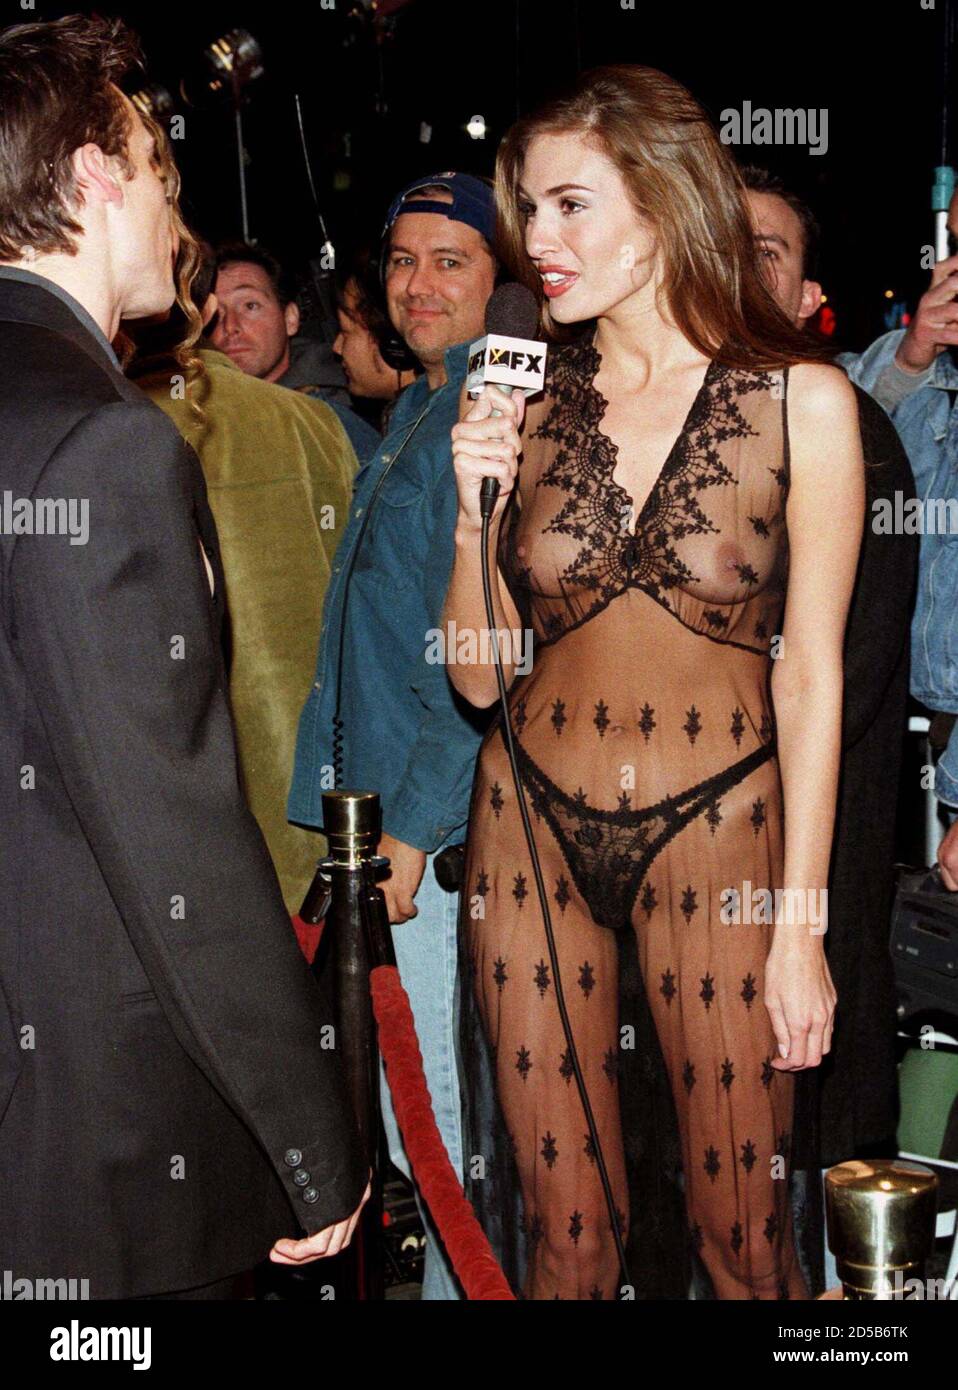 Ashley, a reporter for the cable television channel FX, wears a sheer outfit as she interviews an unidentified celebrity at the premiere of the  new comedy film 'Jawbreaker' February 11 in Hollywood. [The film is a parody of the high school comedy and horror films of the past 20 years and follows the exploits of a clique of girls at a Los Angeles area high school. The film opens in the United States February 19.  ] Stock Photo